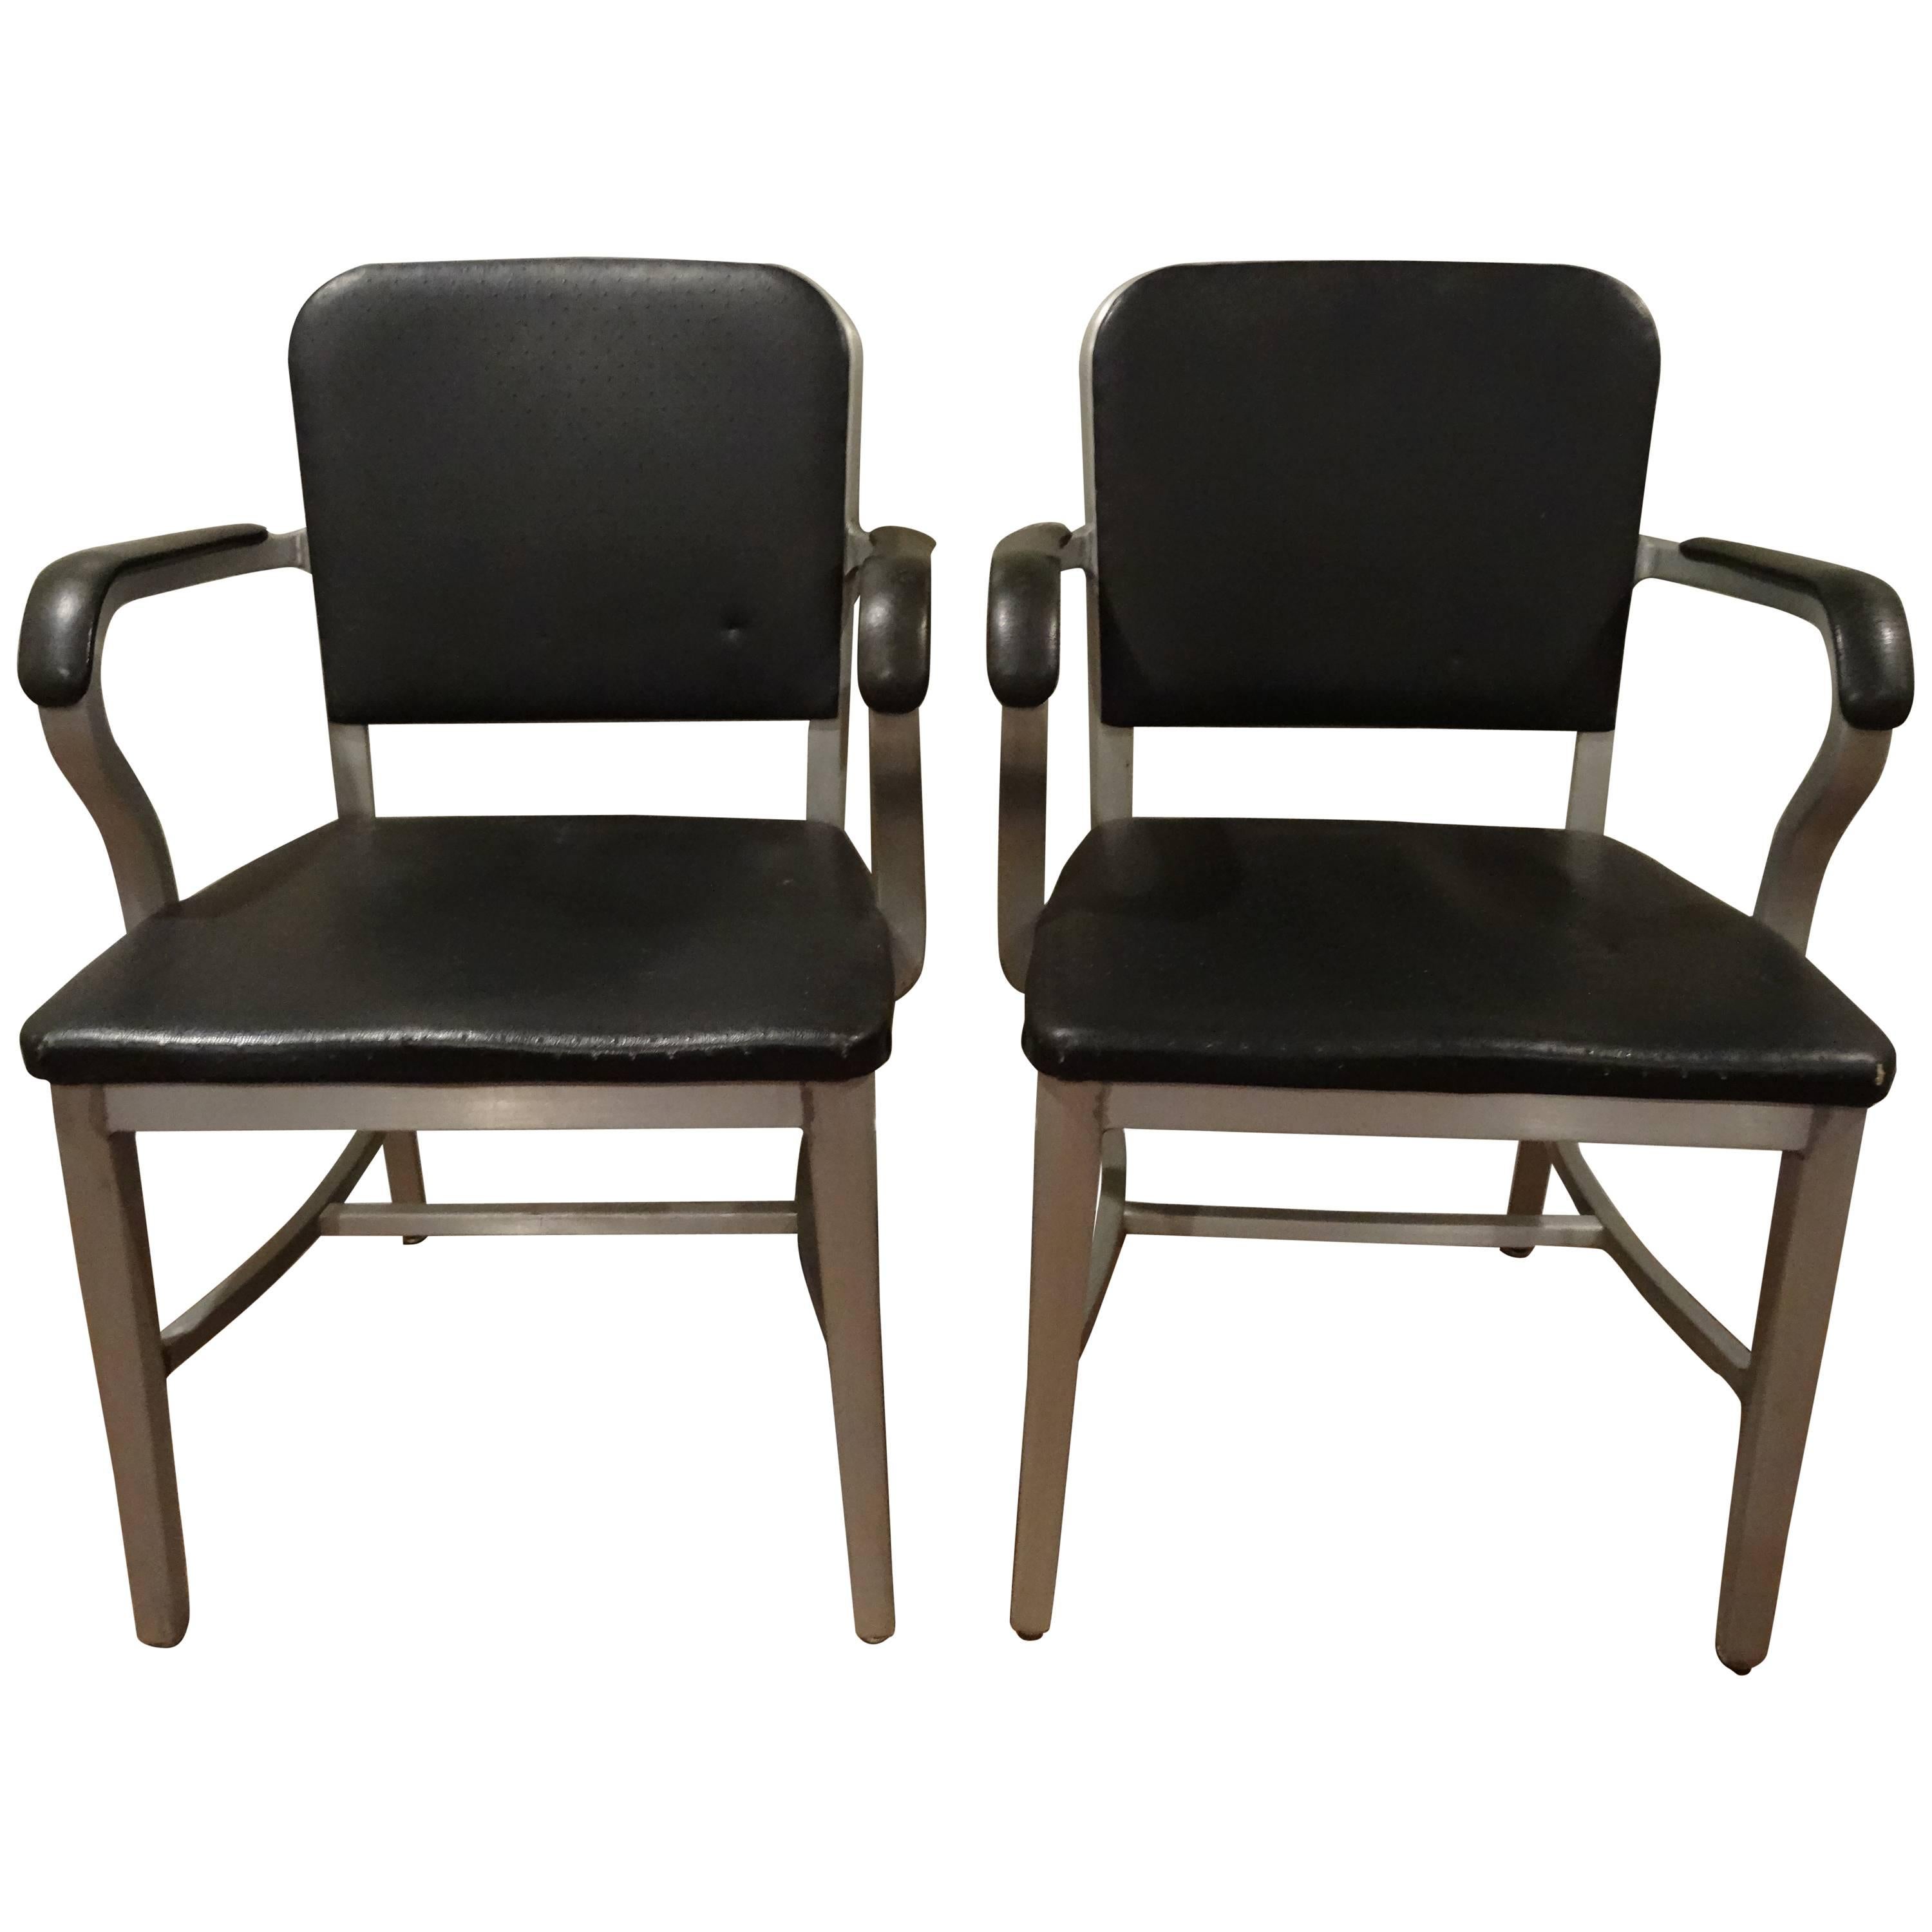 Pair of Goodform Chairs For Sale